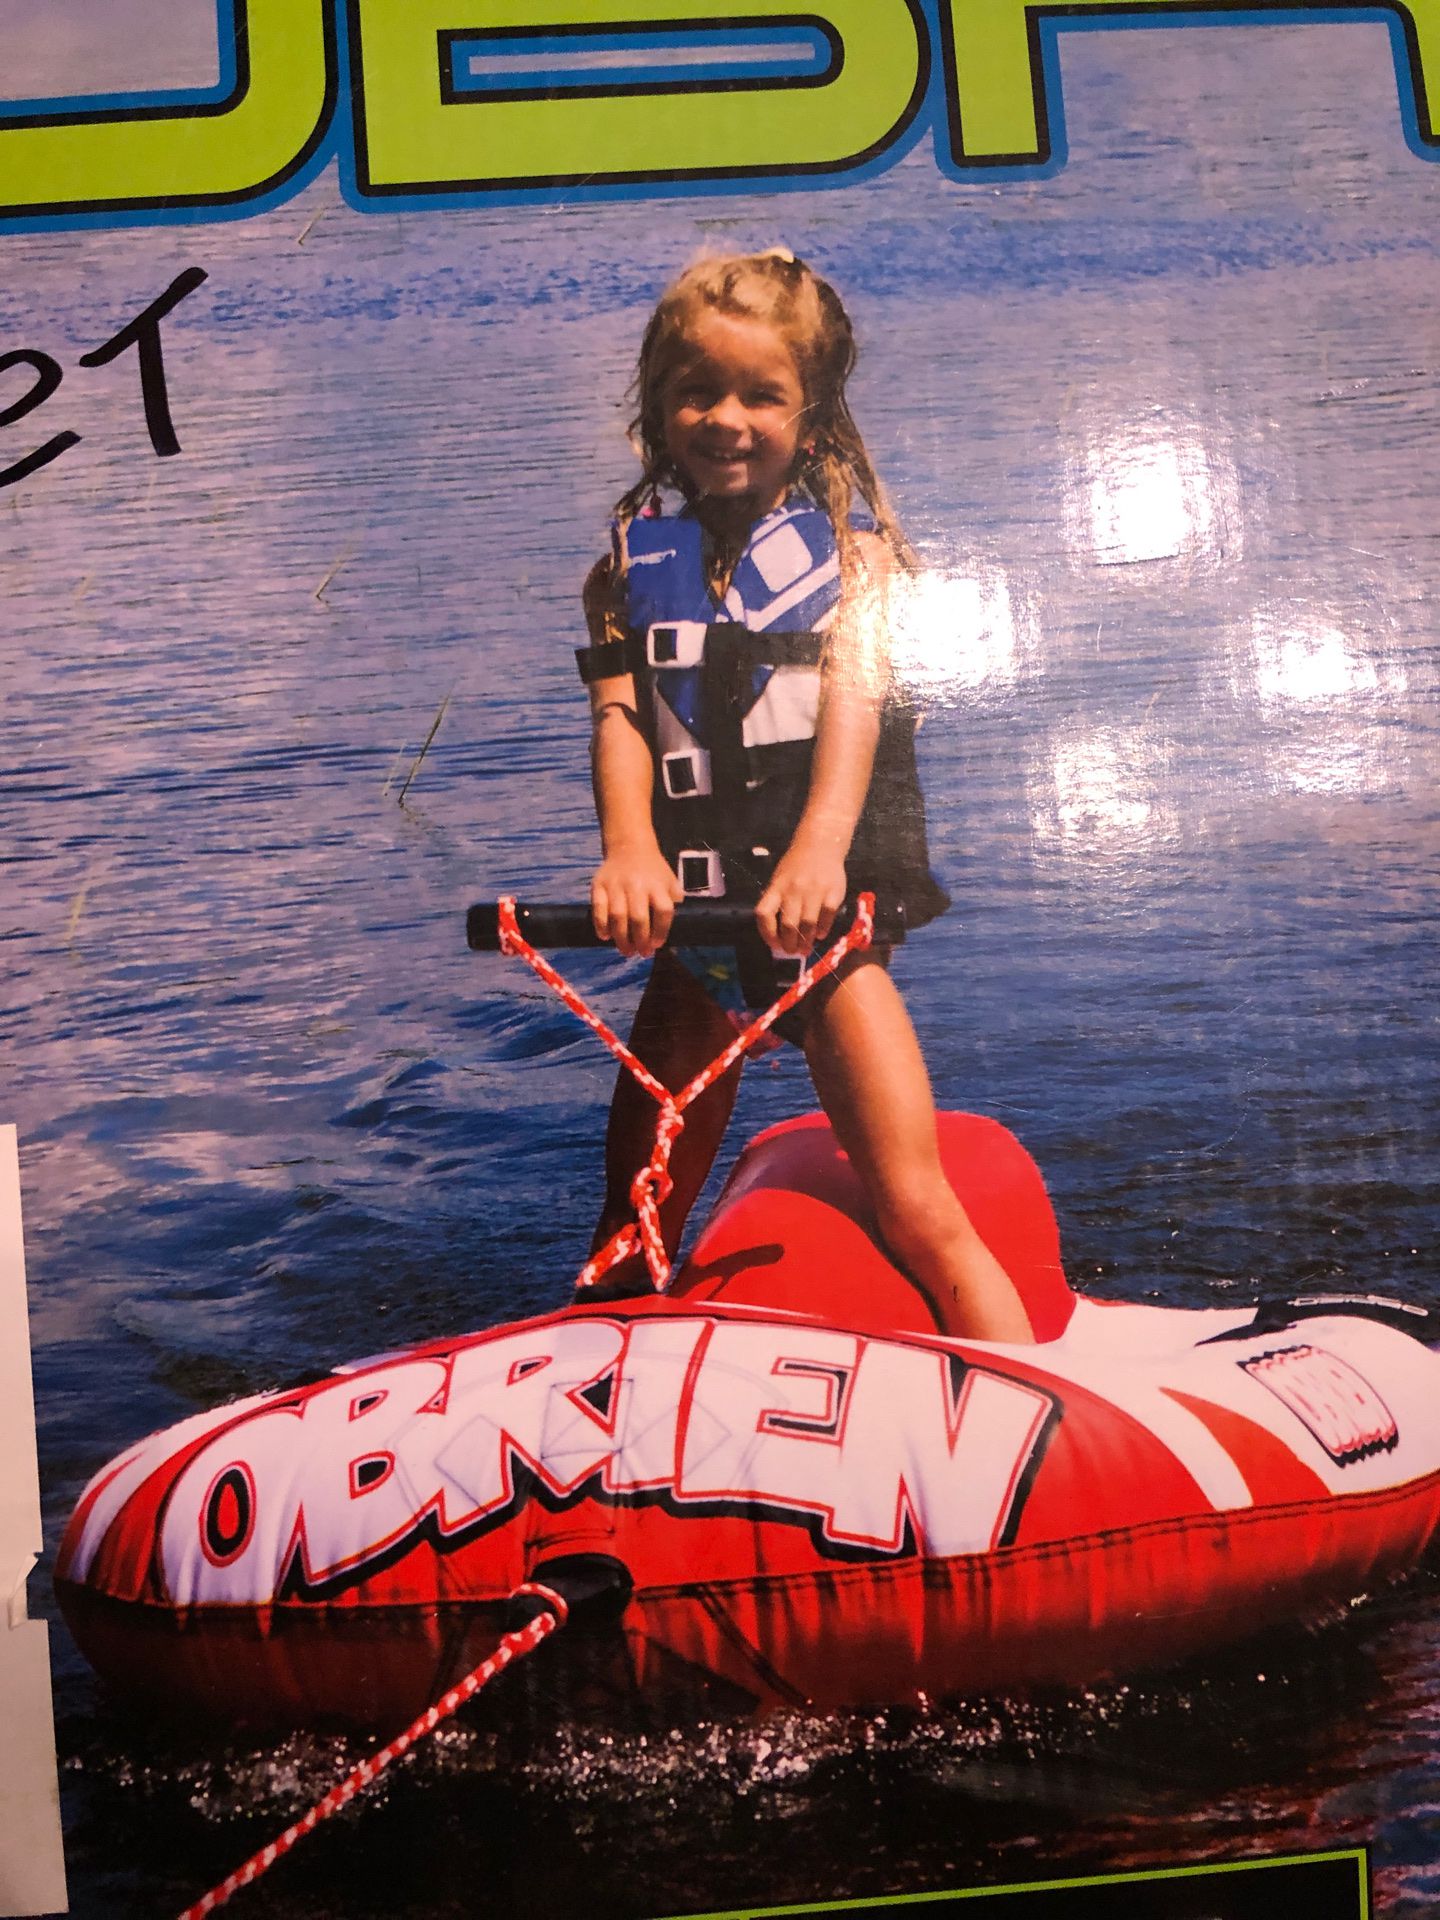 Obrien simple trainer water ski trainer new in box Ready for Fourth of July fun